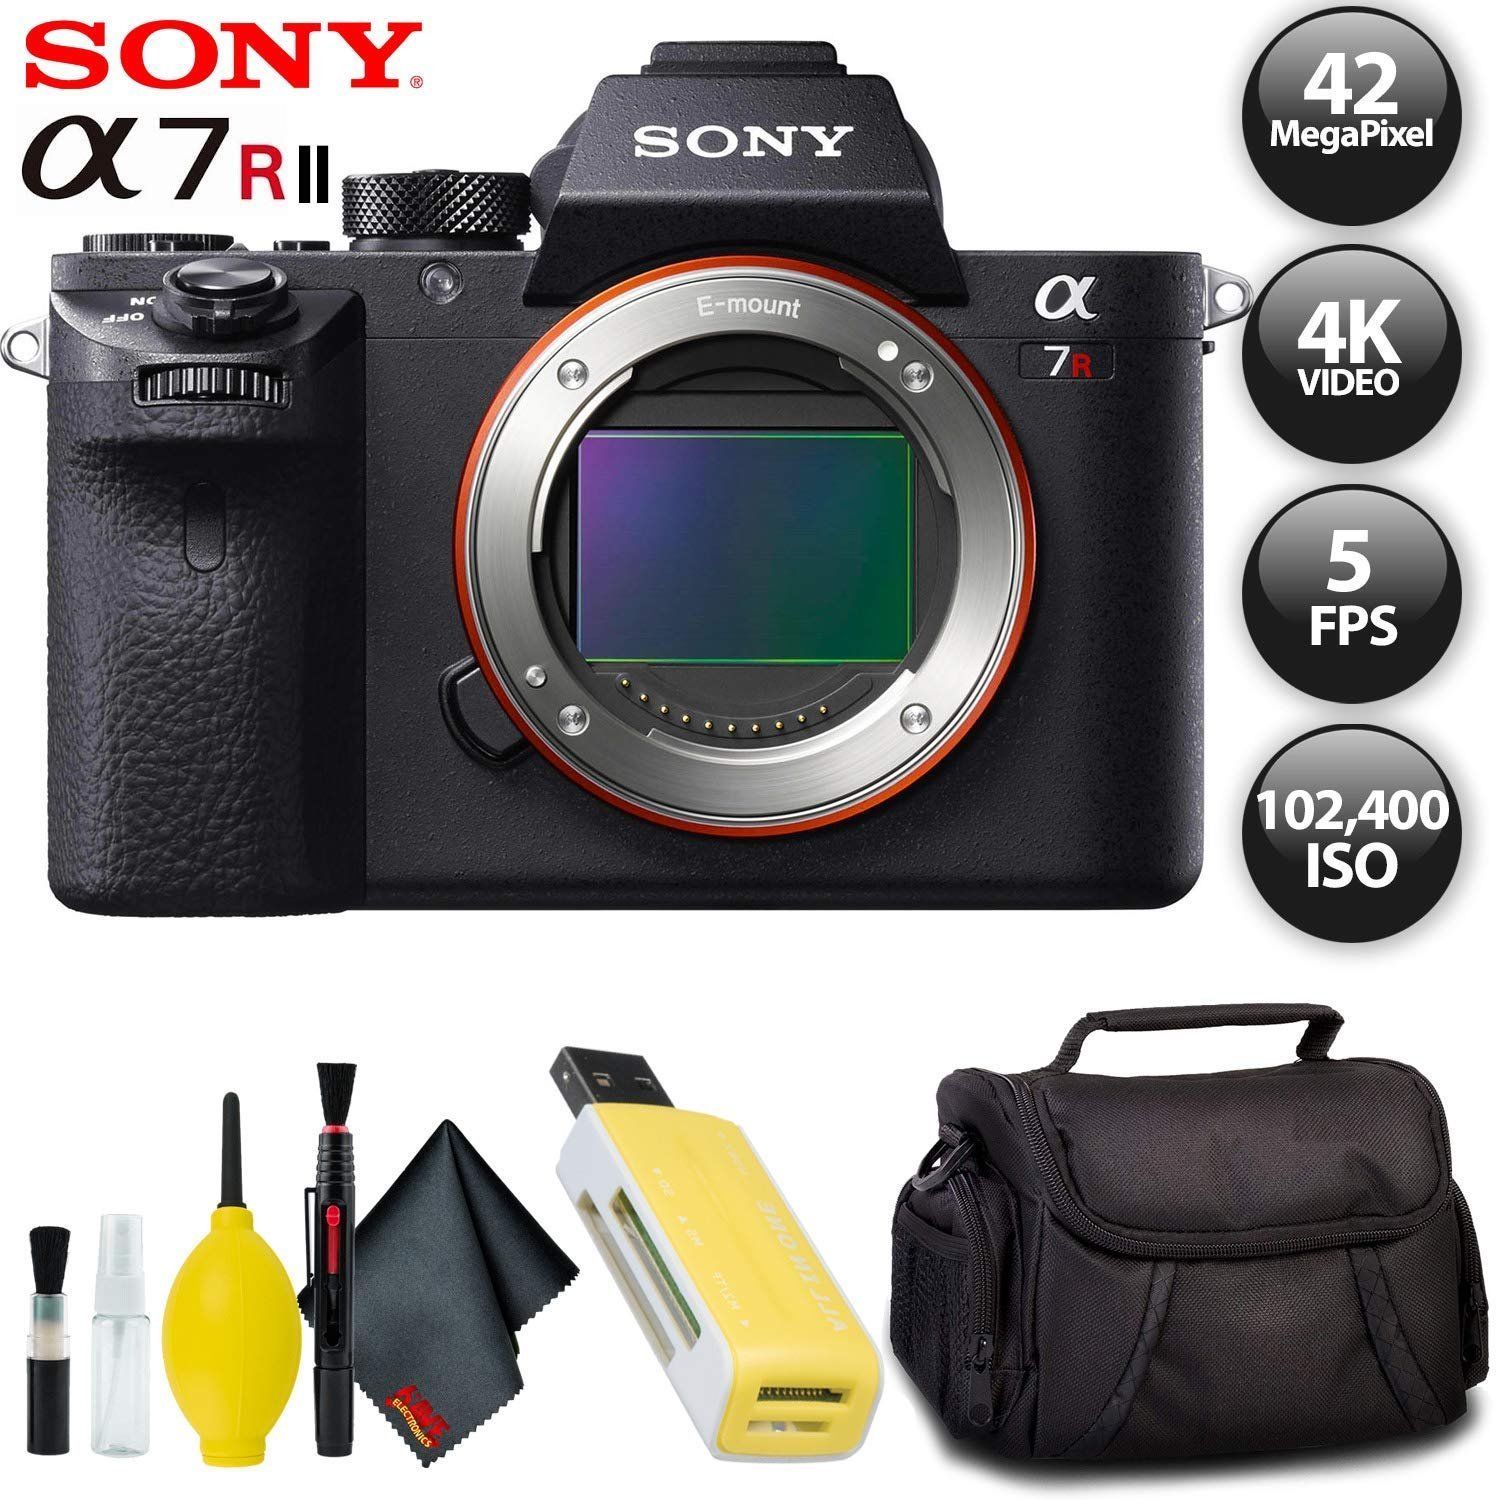 Sony Alpha a7R II Mirrorless Digital Camera + 128GB Memory Card Base Kit with Accessories